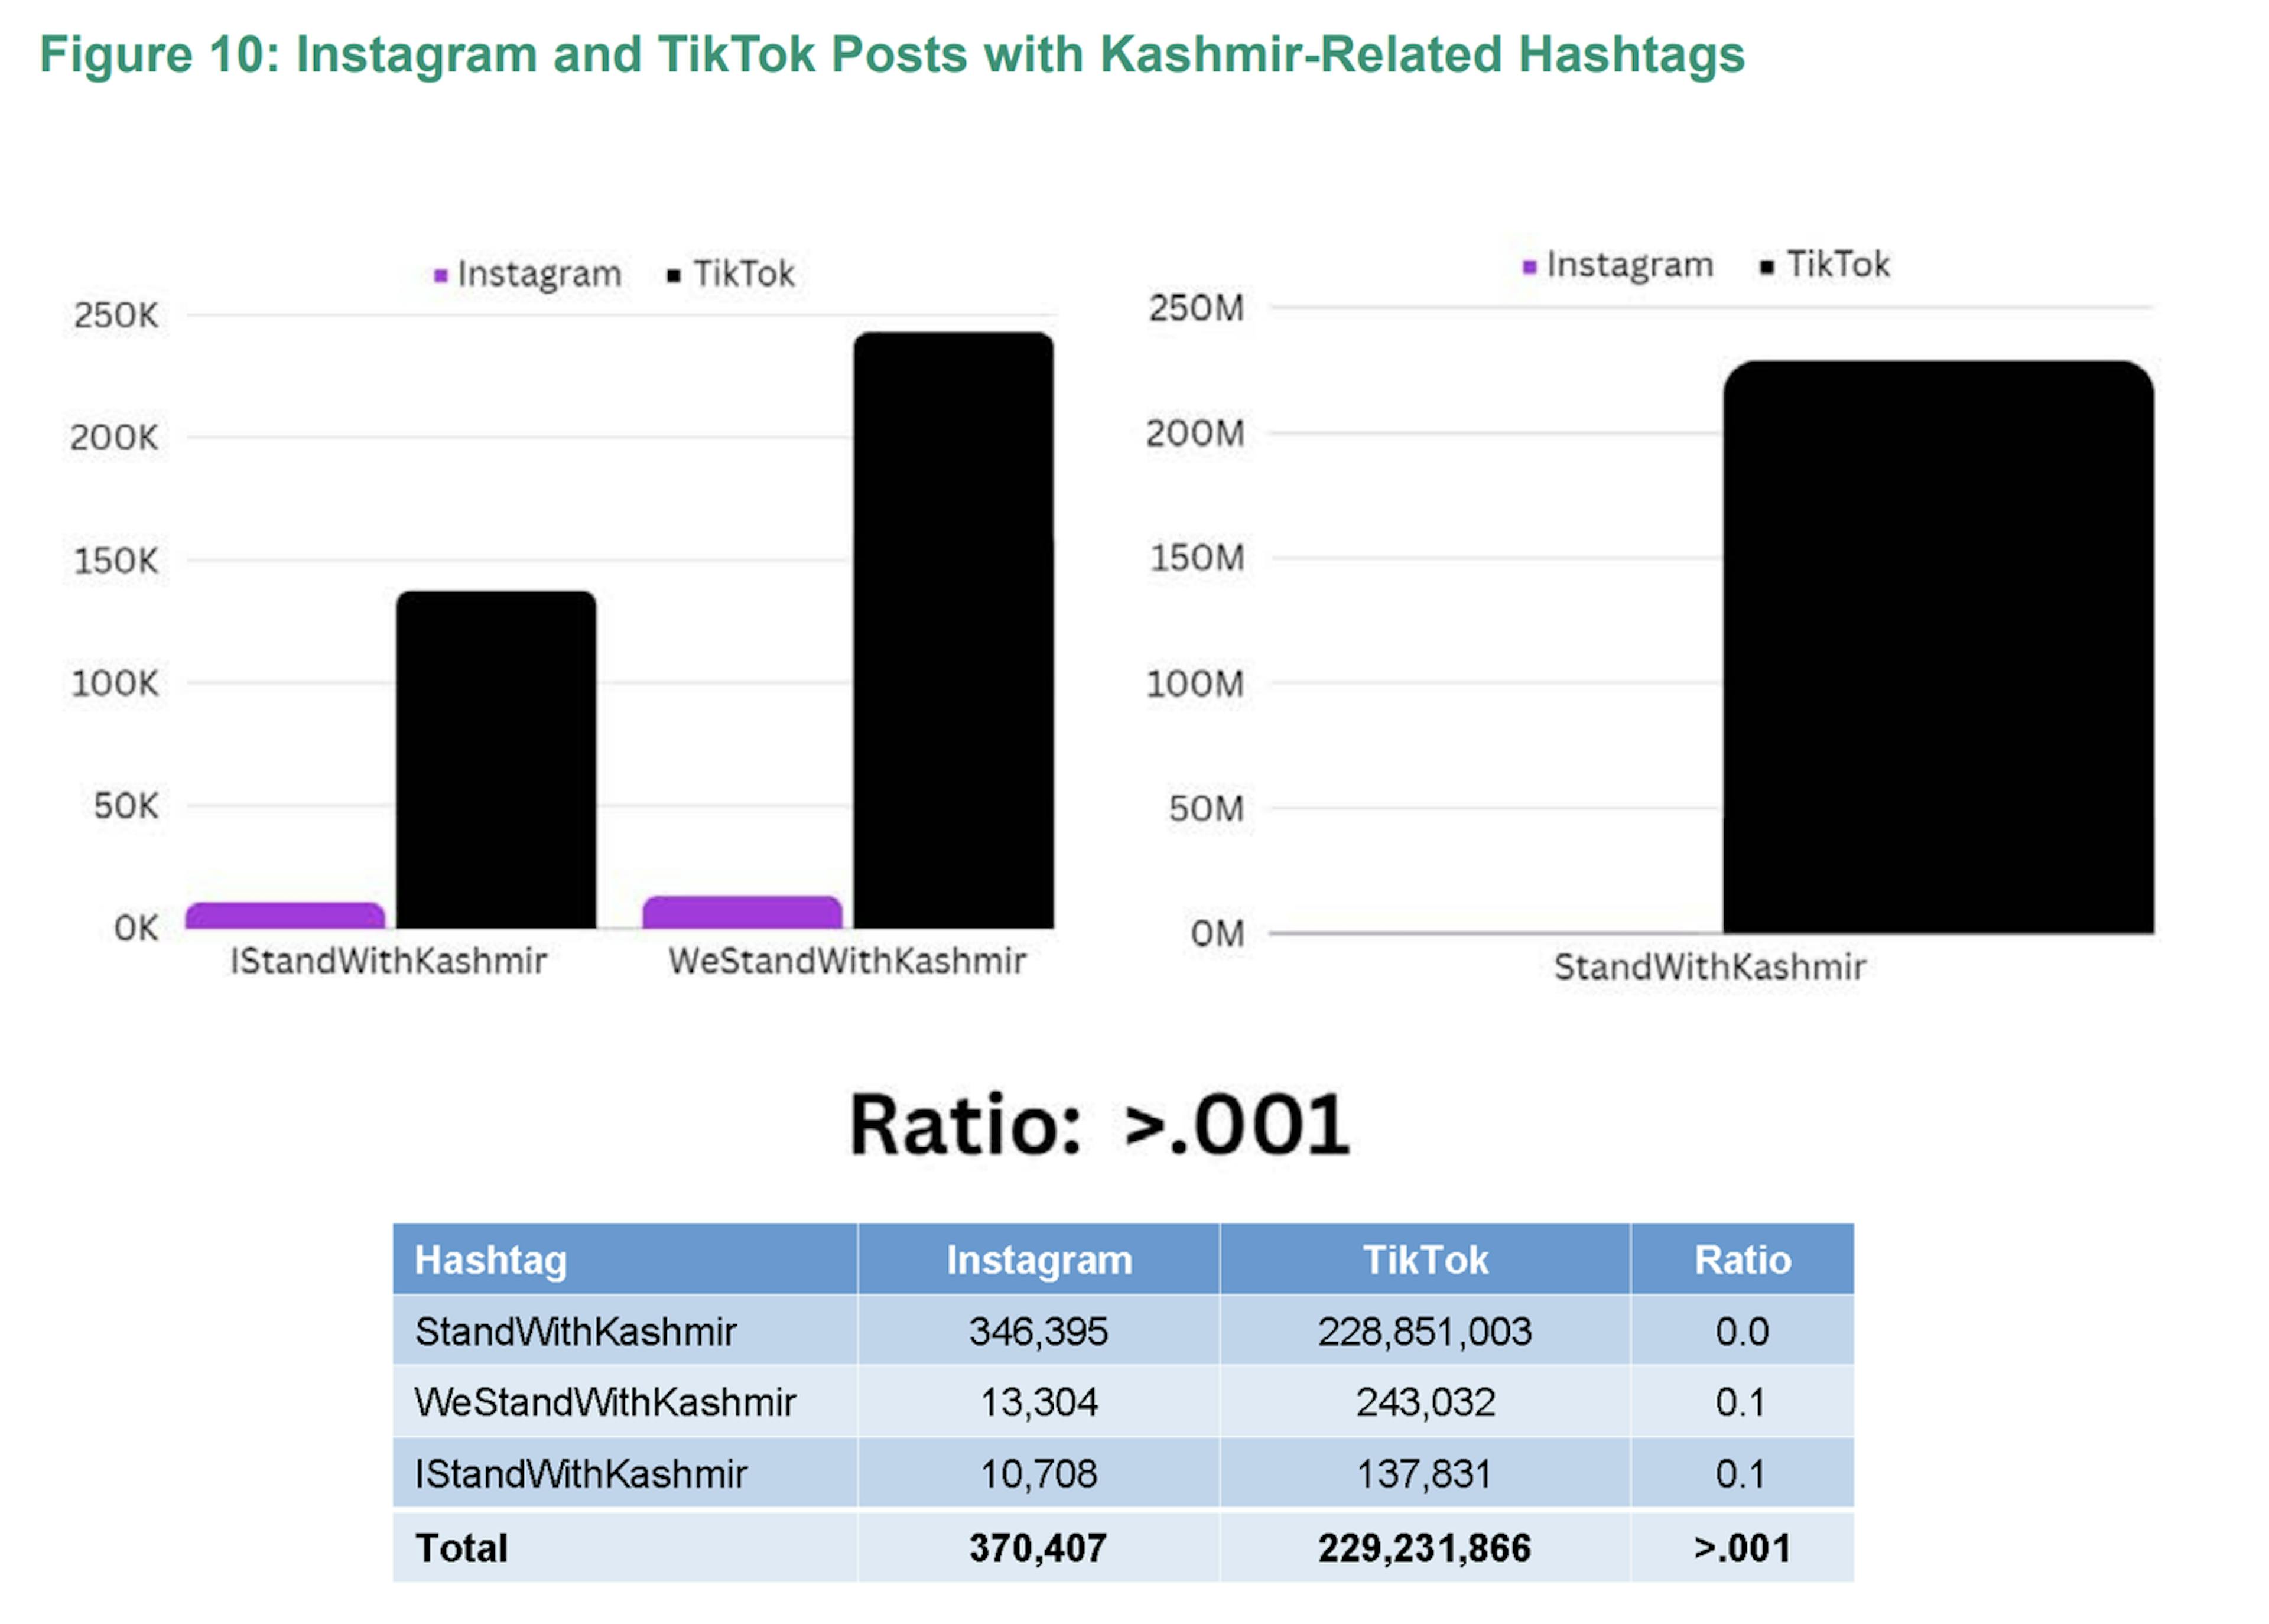 The number of posts with Kashmir-related hashtags is considerably higher on TikTok with the number on TikTok being over 600 times larger than the number on Instagram.